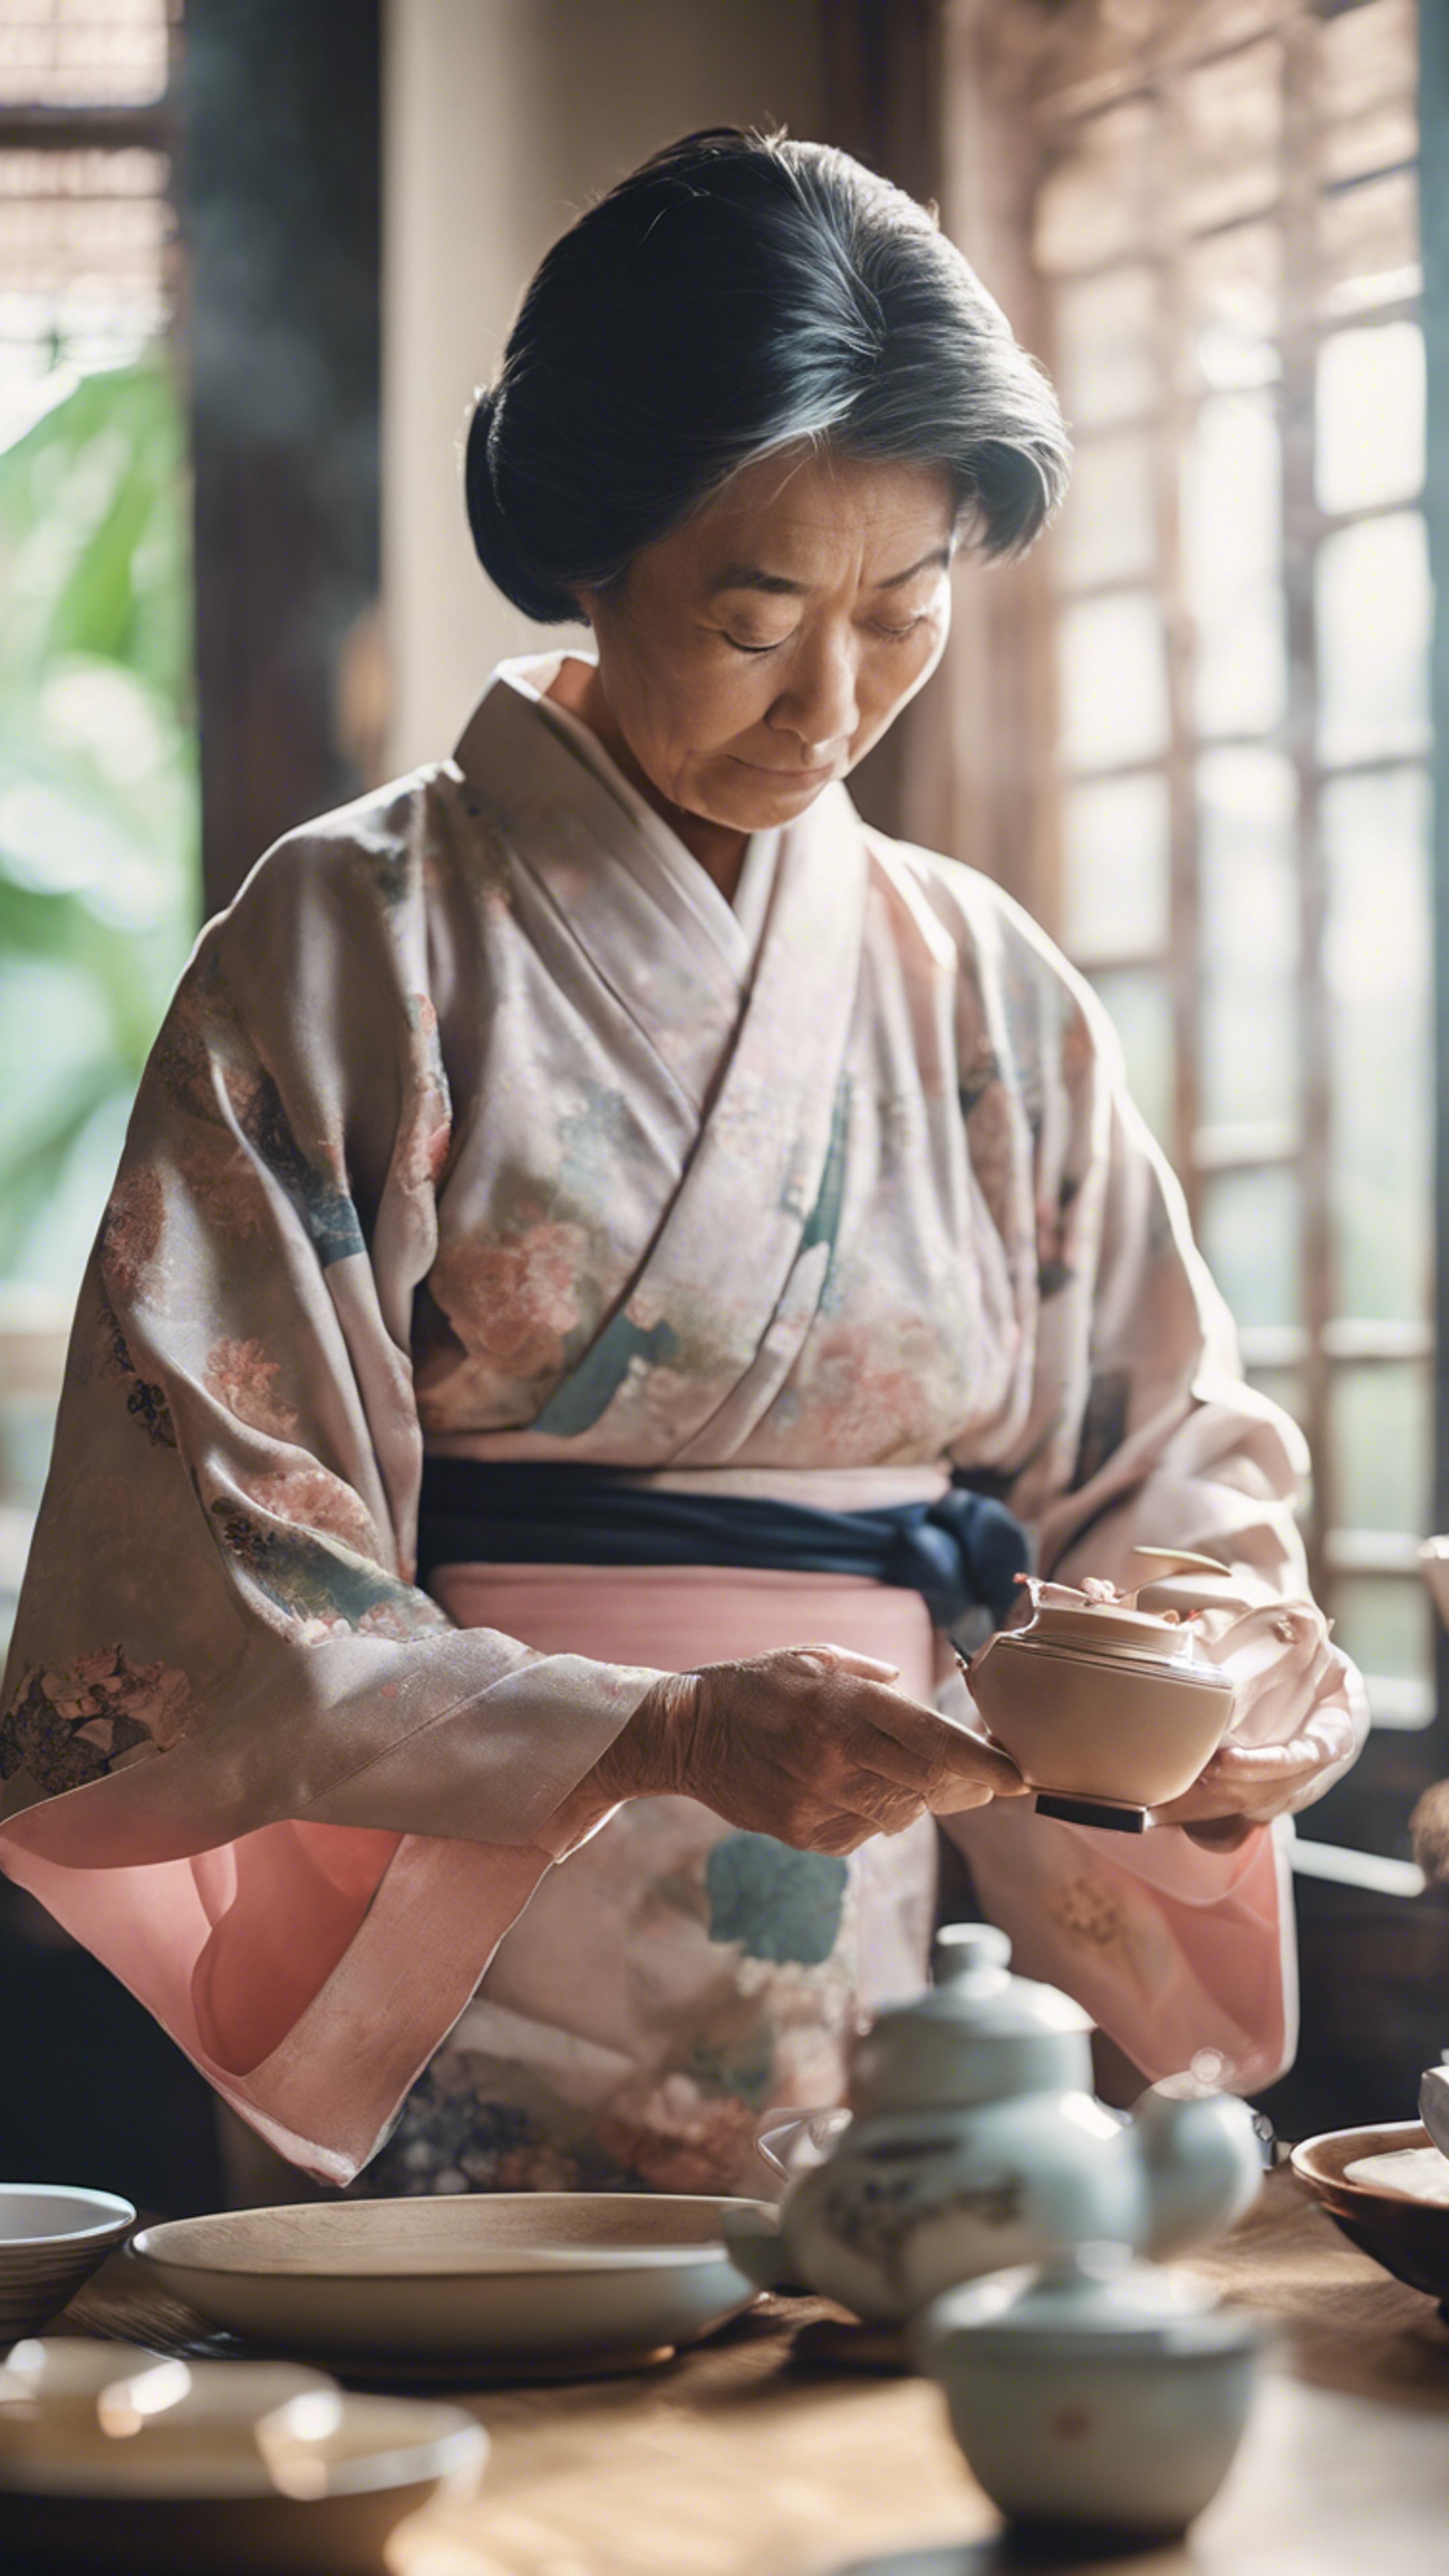 A mid-aged woman in a soft pastel-colored kimono skillfully preparing tea, with focused expression.壁紙[7079b4bbe9c240848a85]